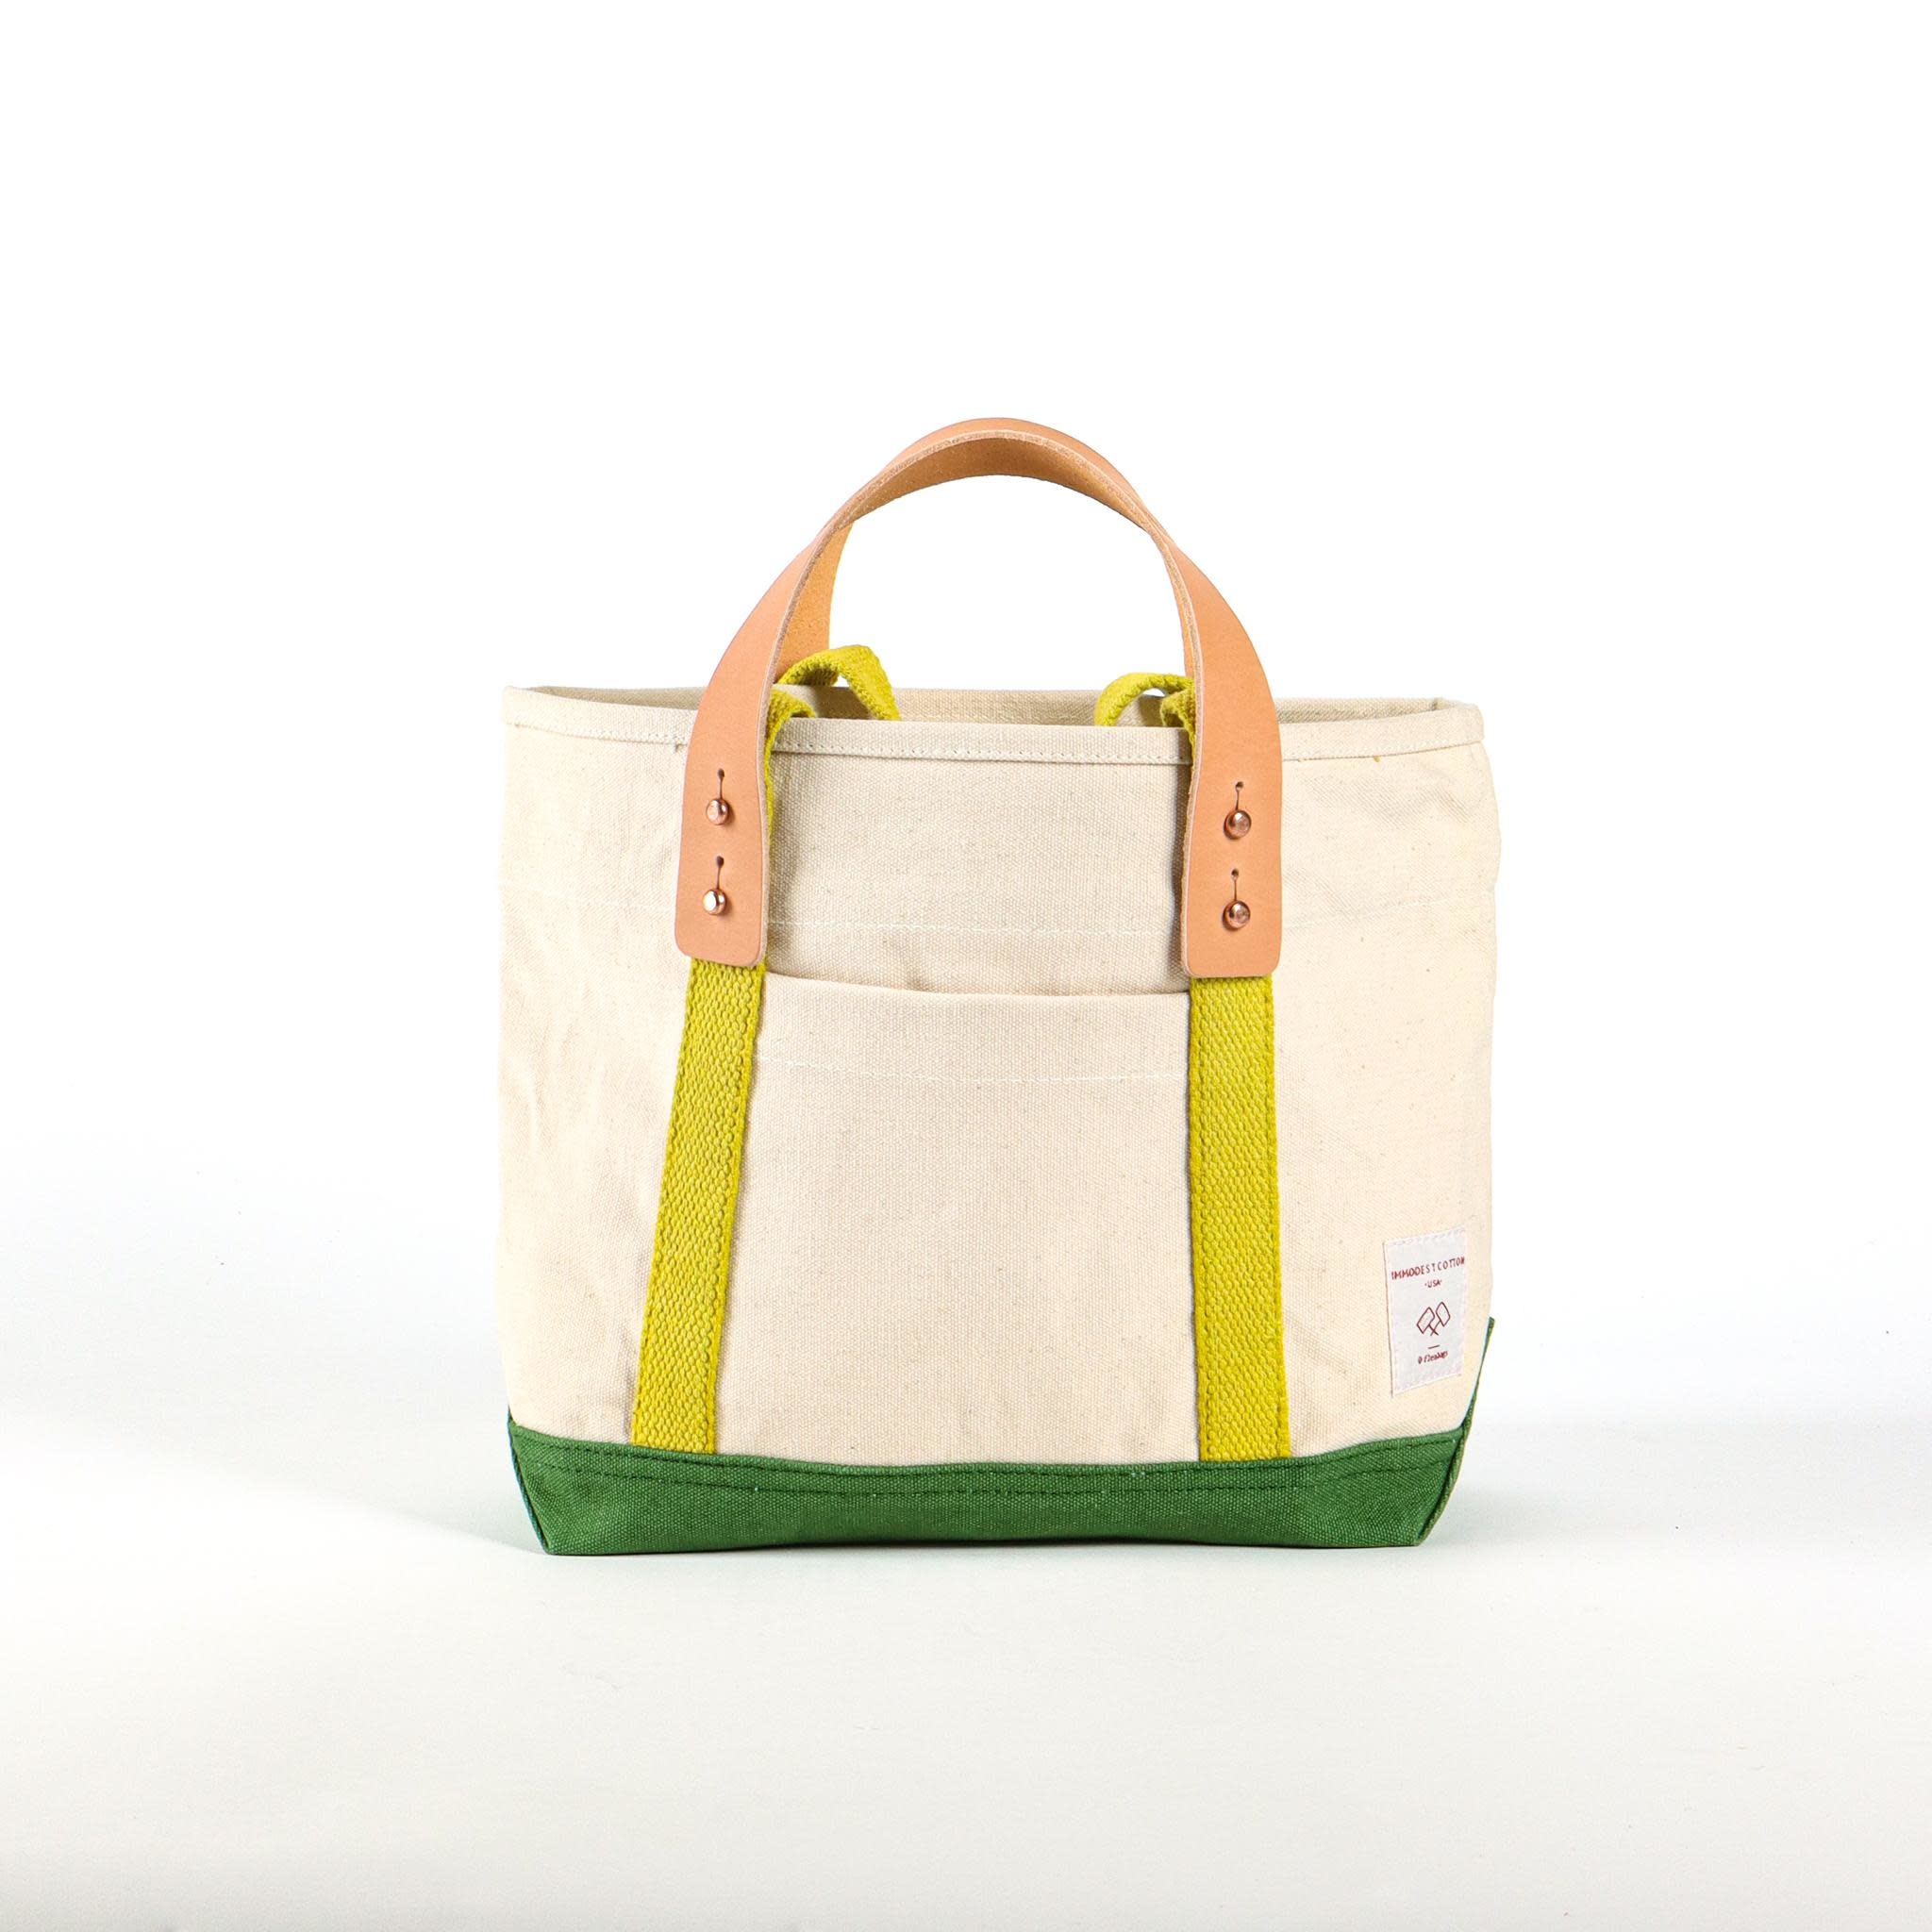 IMMODEST COTTON x Fleabags - IMC IMMODEST COTTON - Daily Mini Tote in Earth